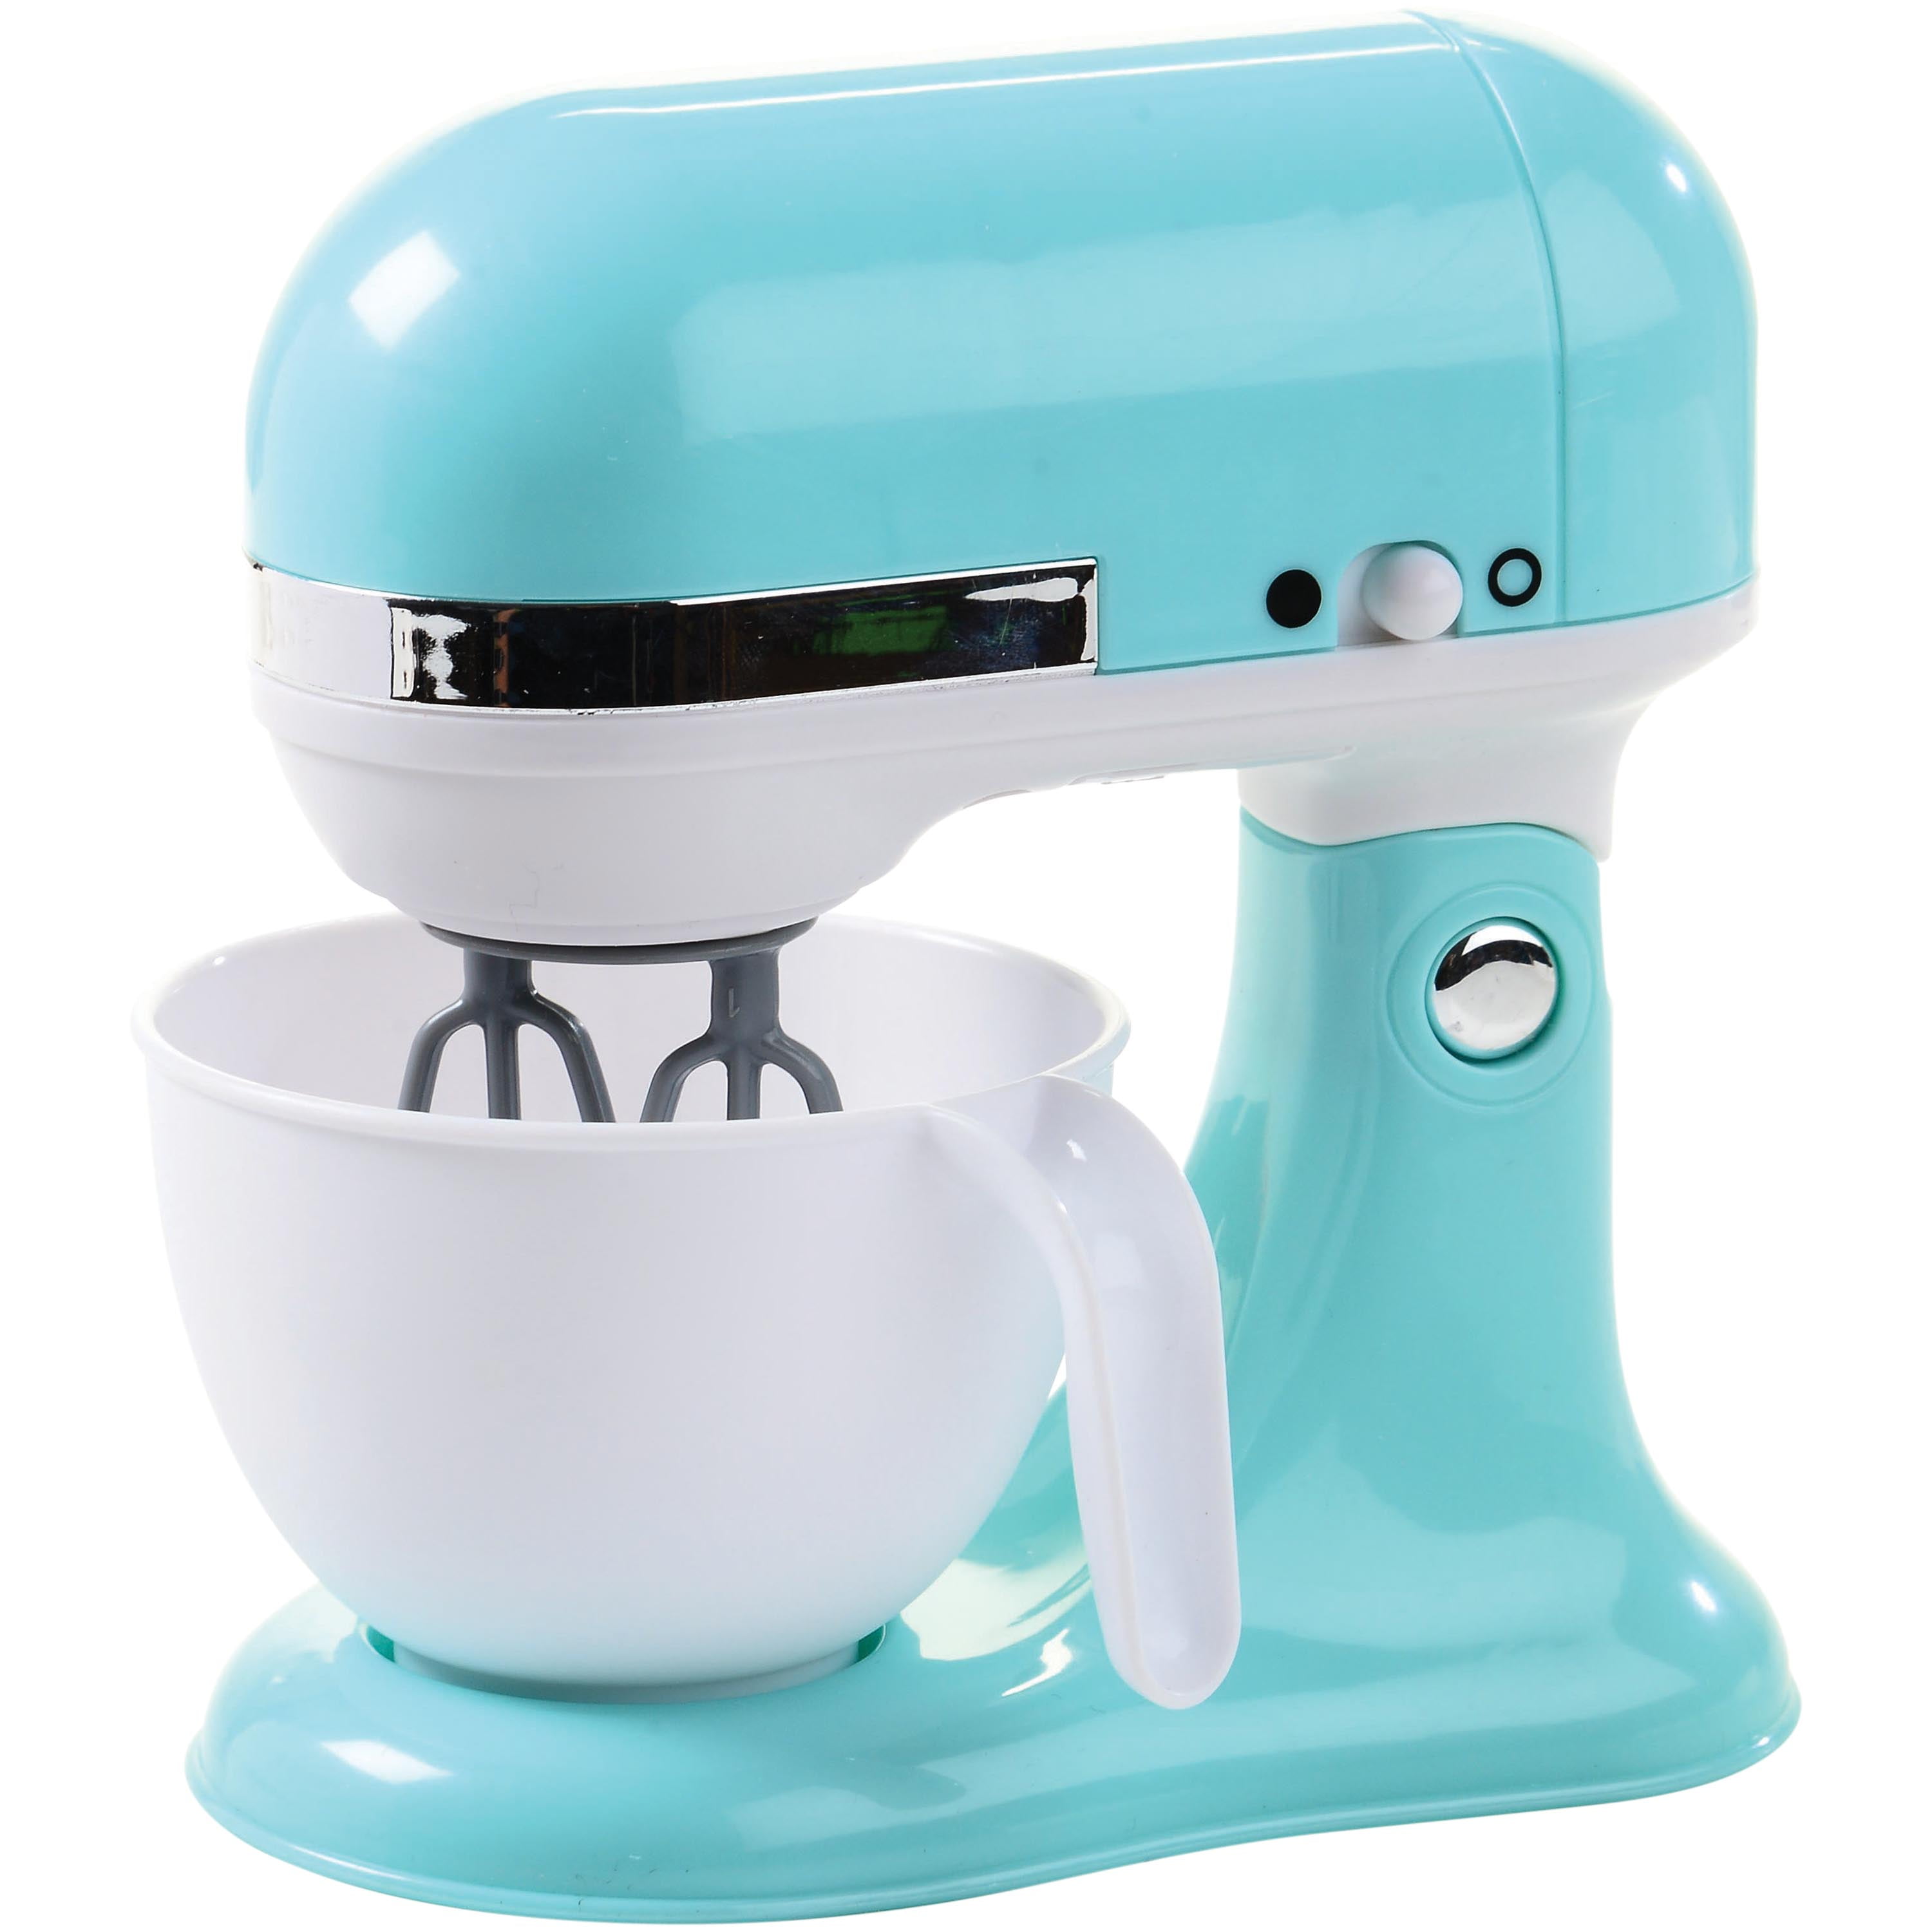 Ages 3 Years & Older Constructive Playthings Set of 2 “My Kitchen” Series Blender and Mixer in a Blue Modern Design with Realistic Functions 